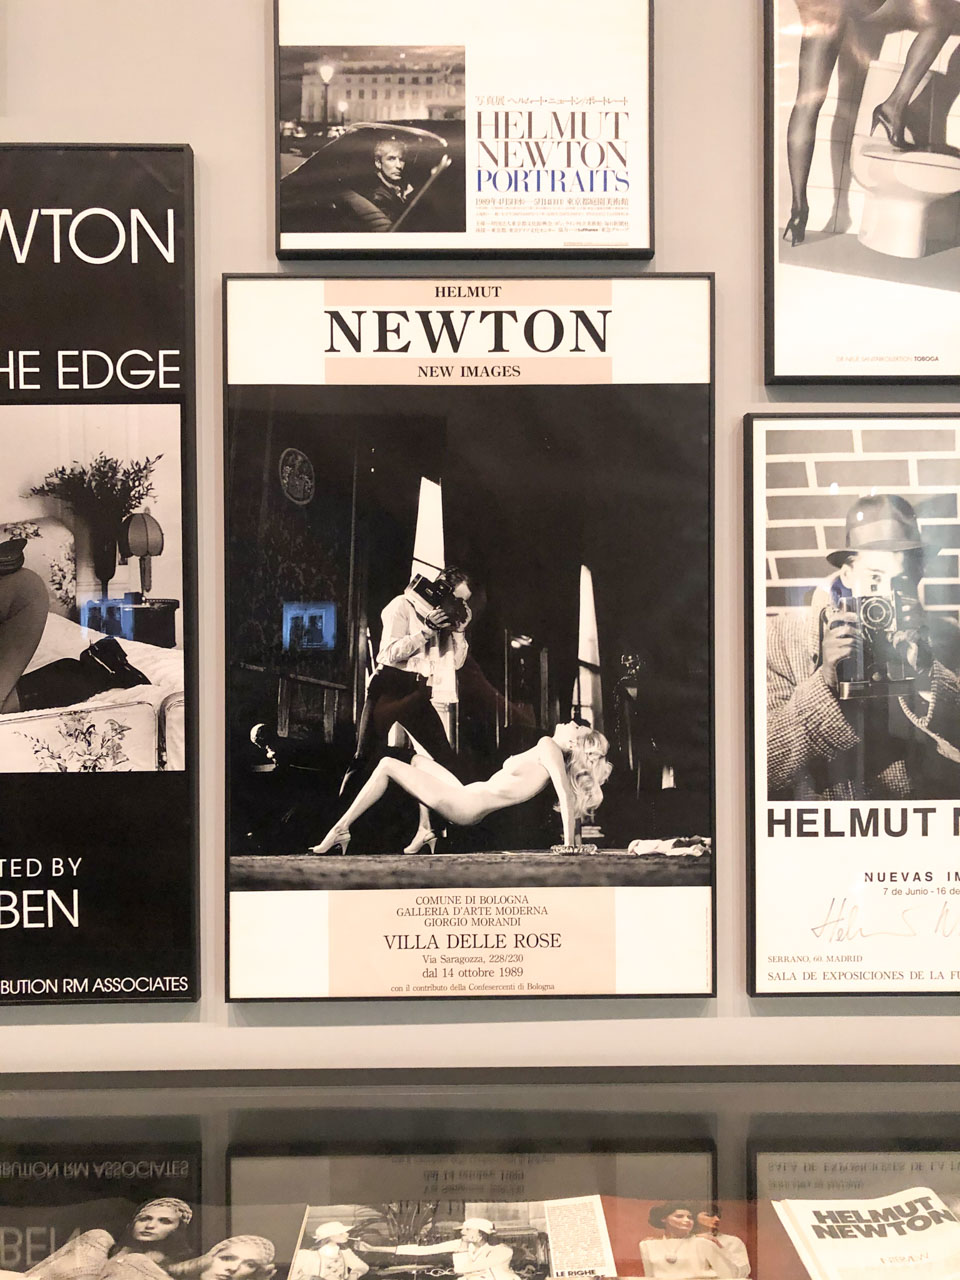 Framed Helmut Newton photos and posters on display at the Museum of Photography in Berlin, Germany